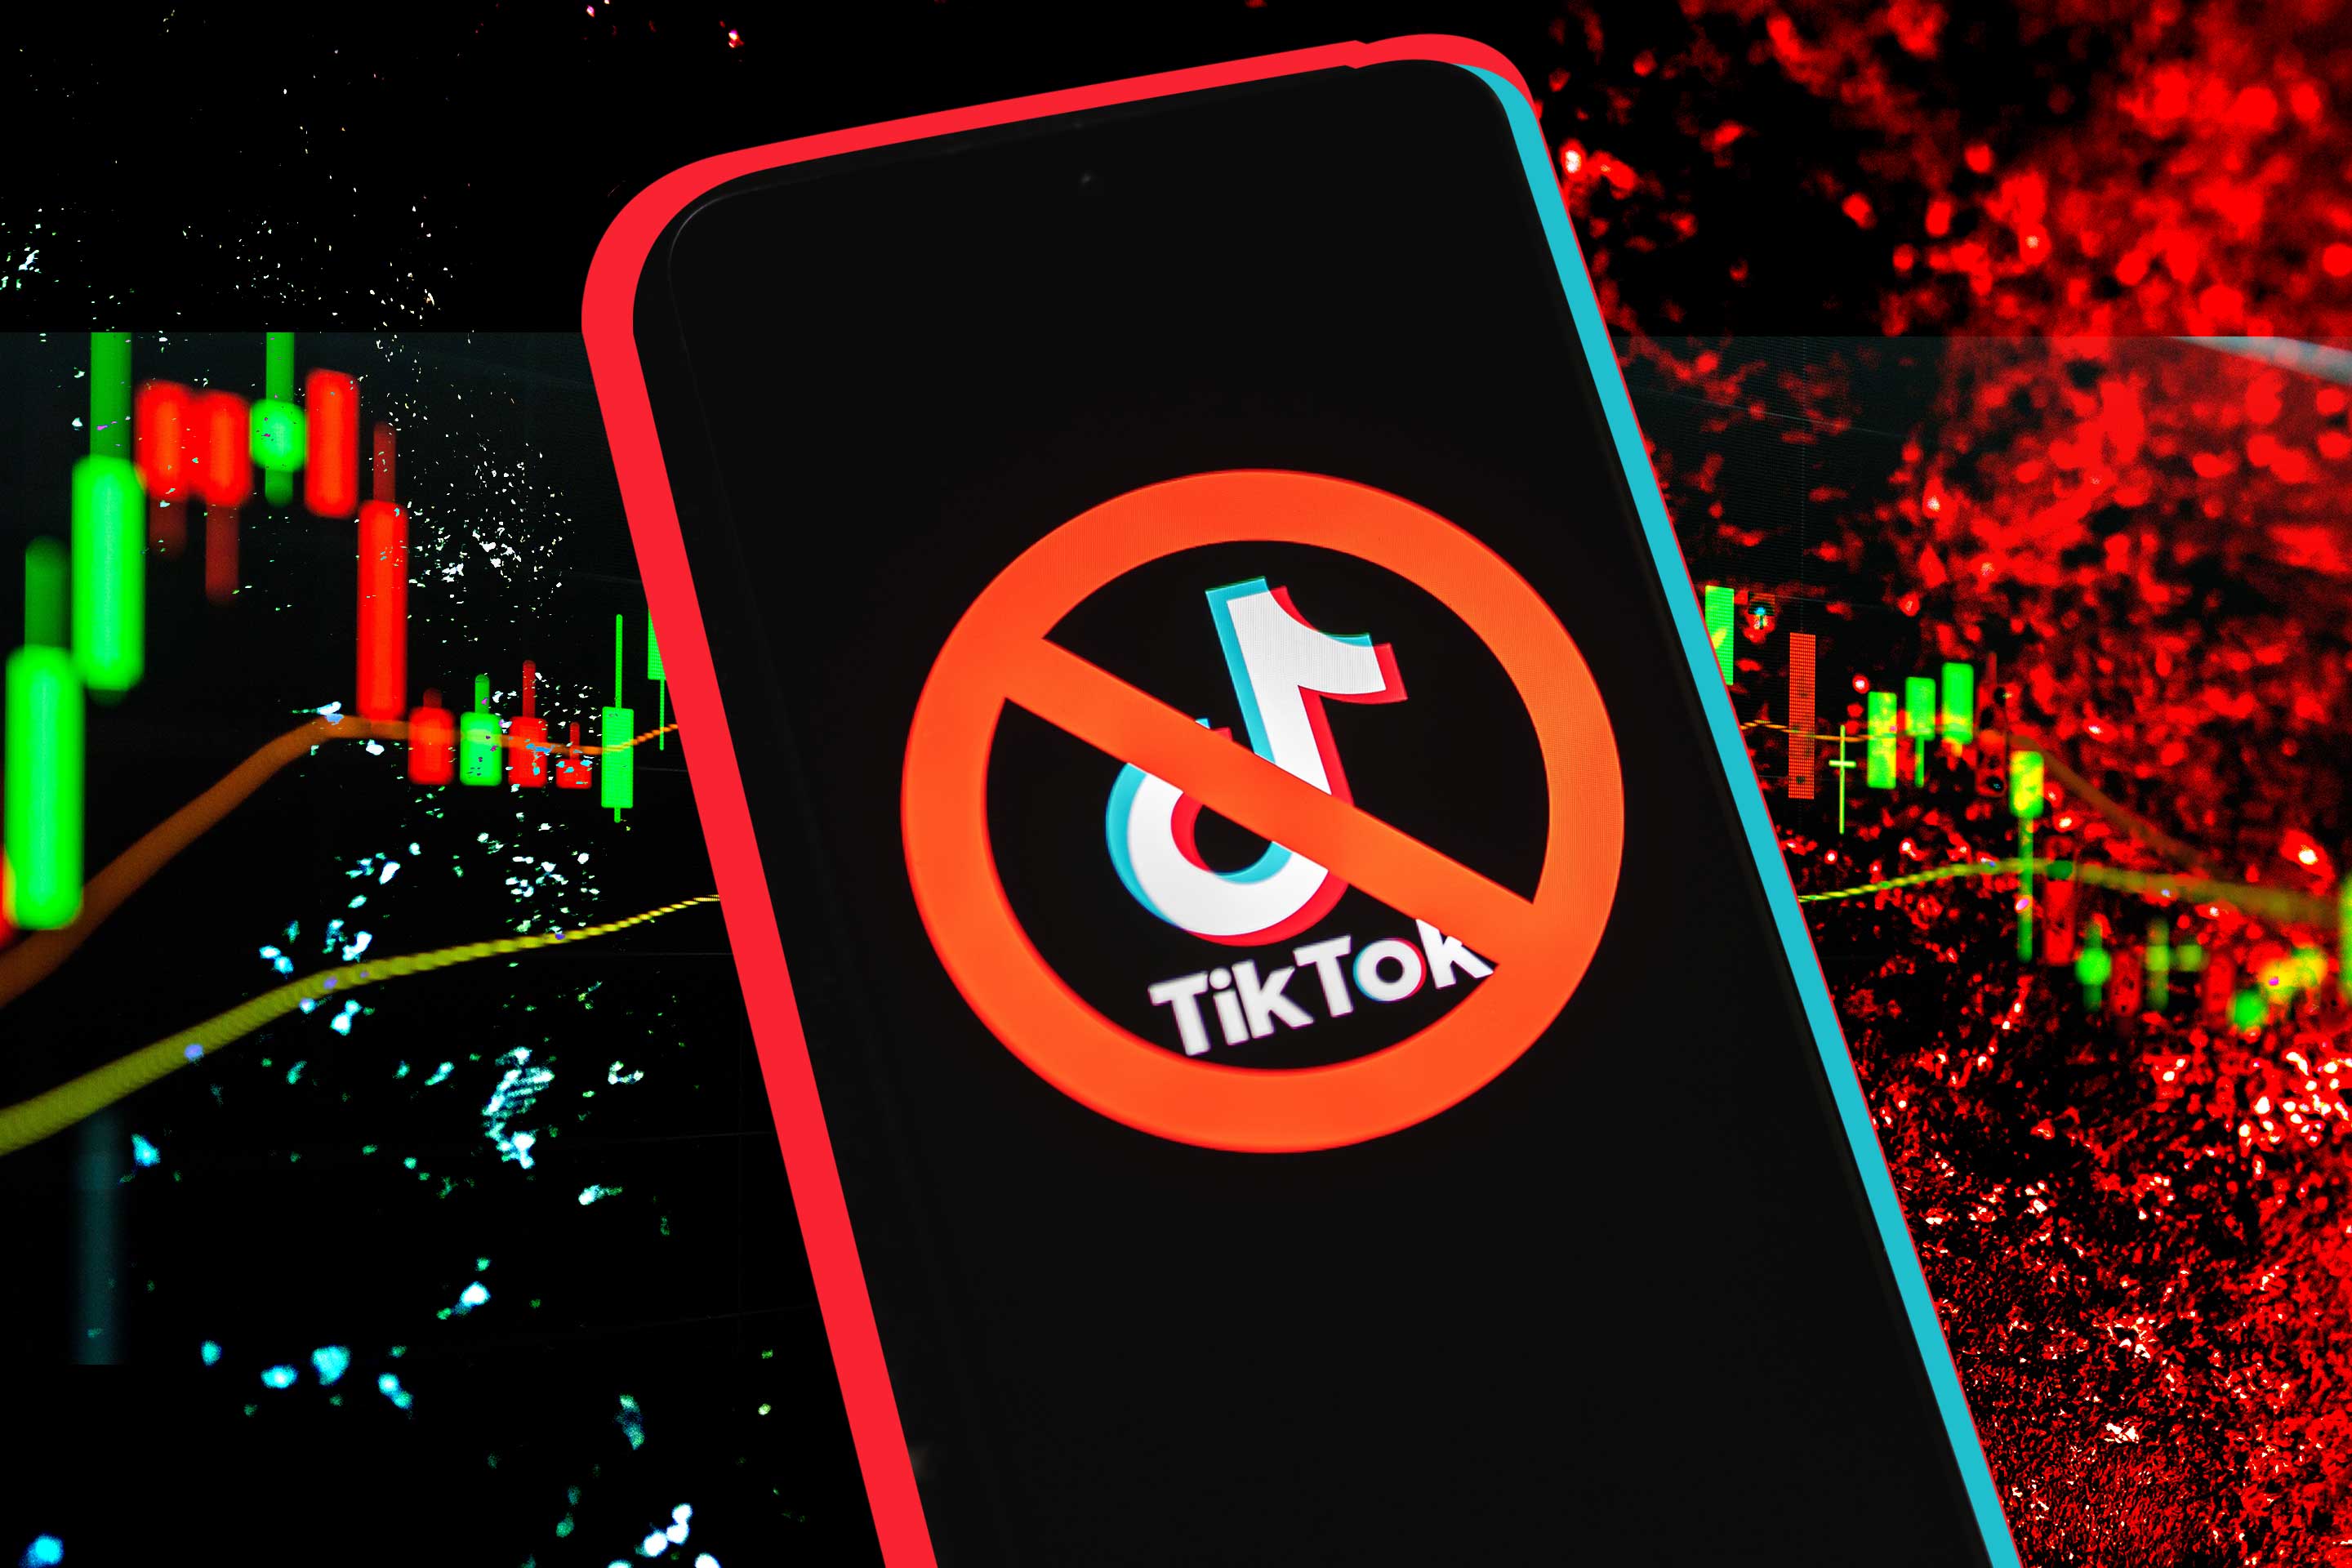 How a TikTok Ban Could Boost Stock Prices for Meta, Alphabet and Snap